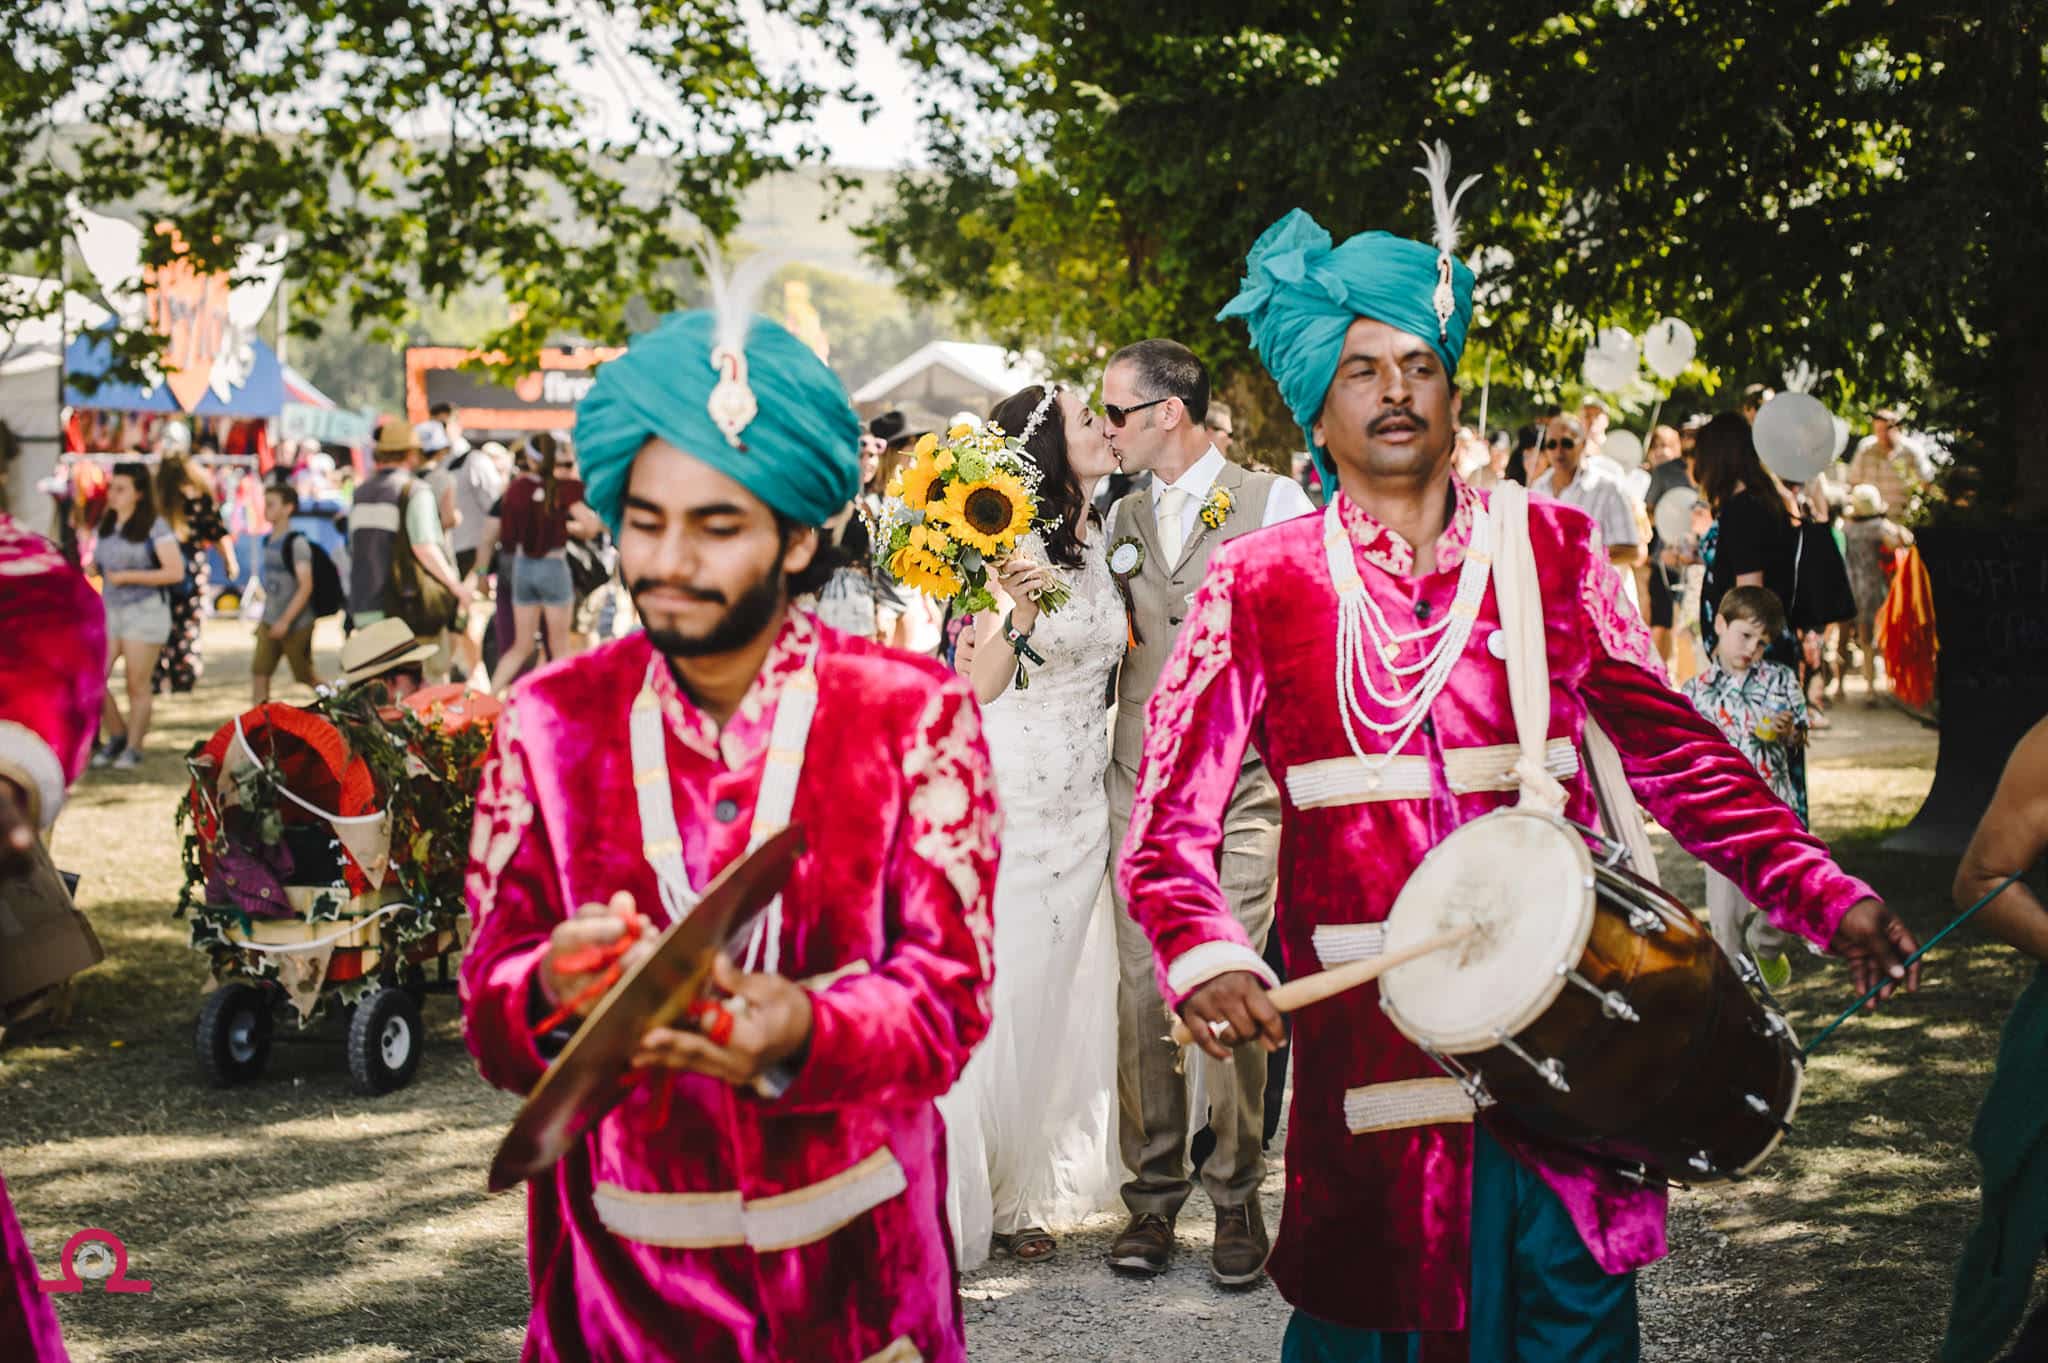 Band plays for bride and groom at festival